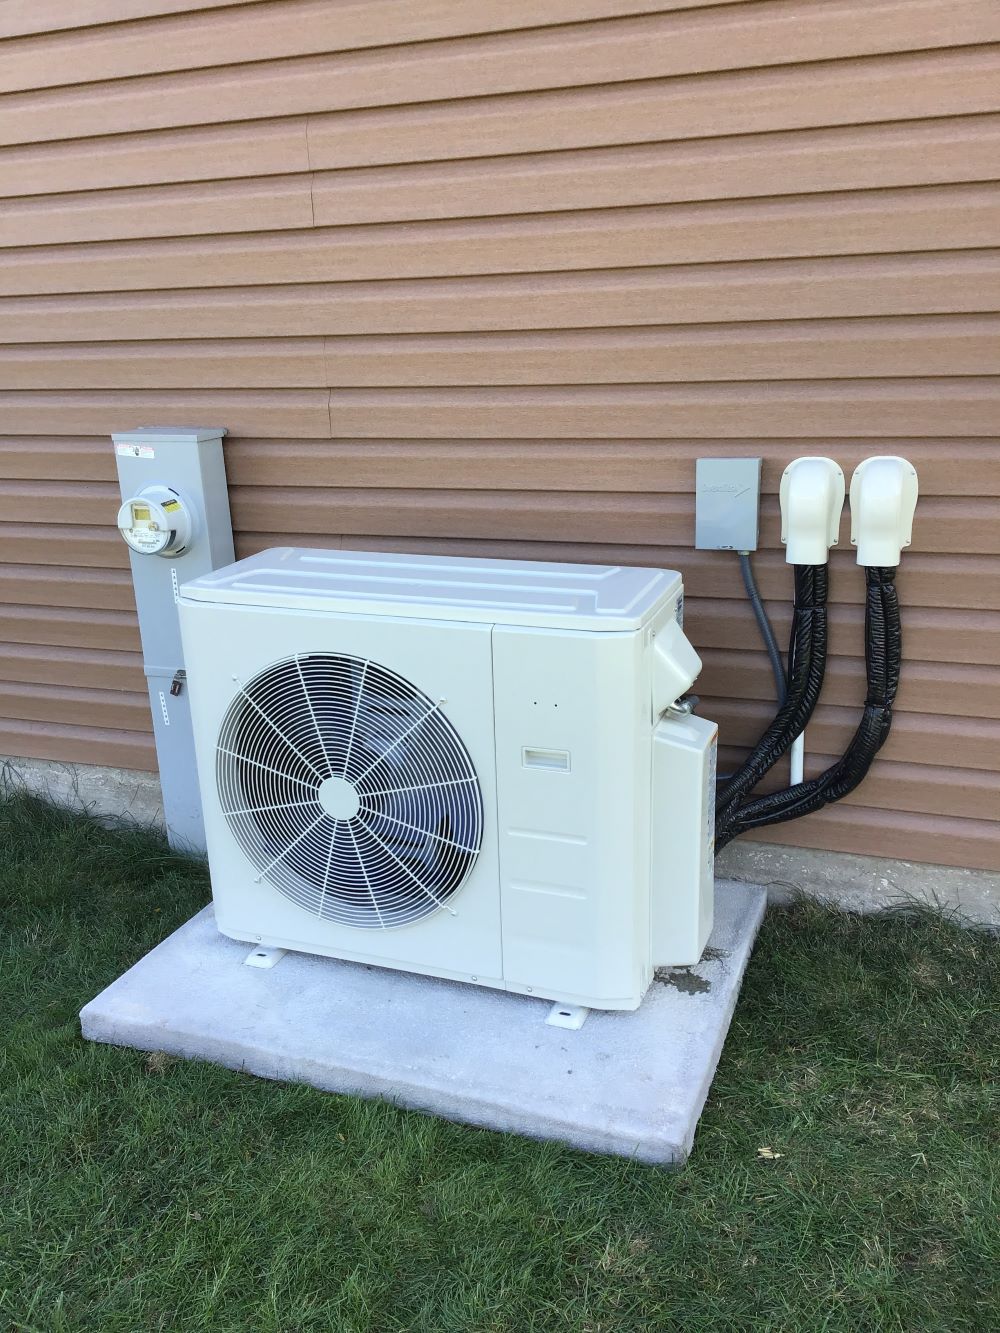 Ductless heat pump system on the exterior of a house